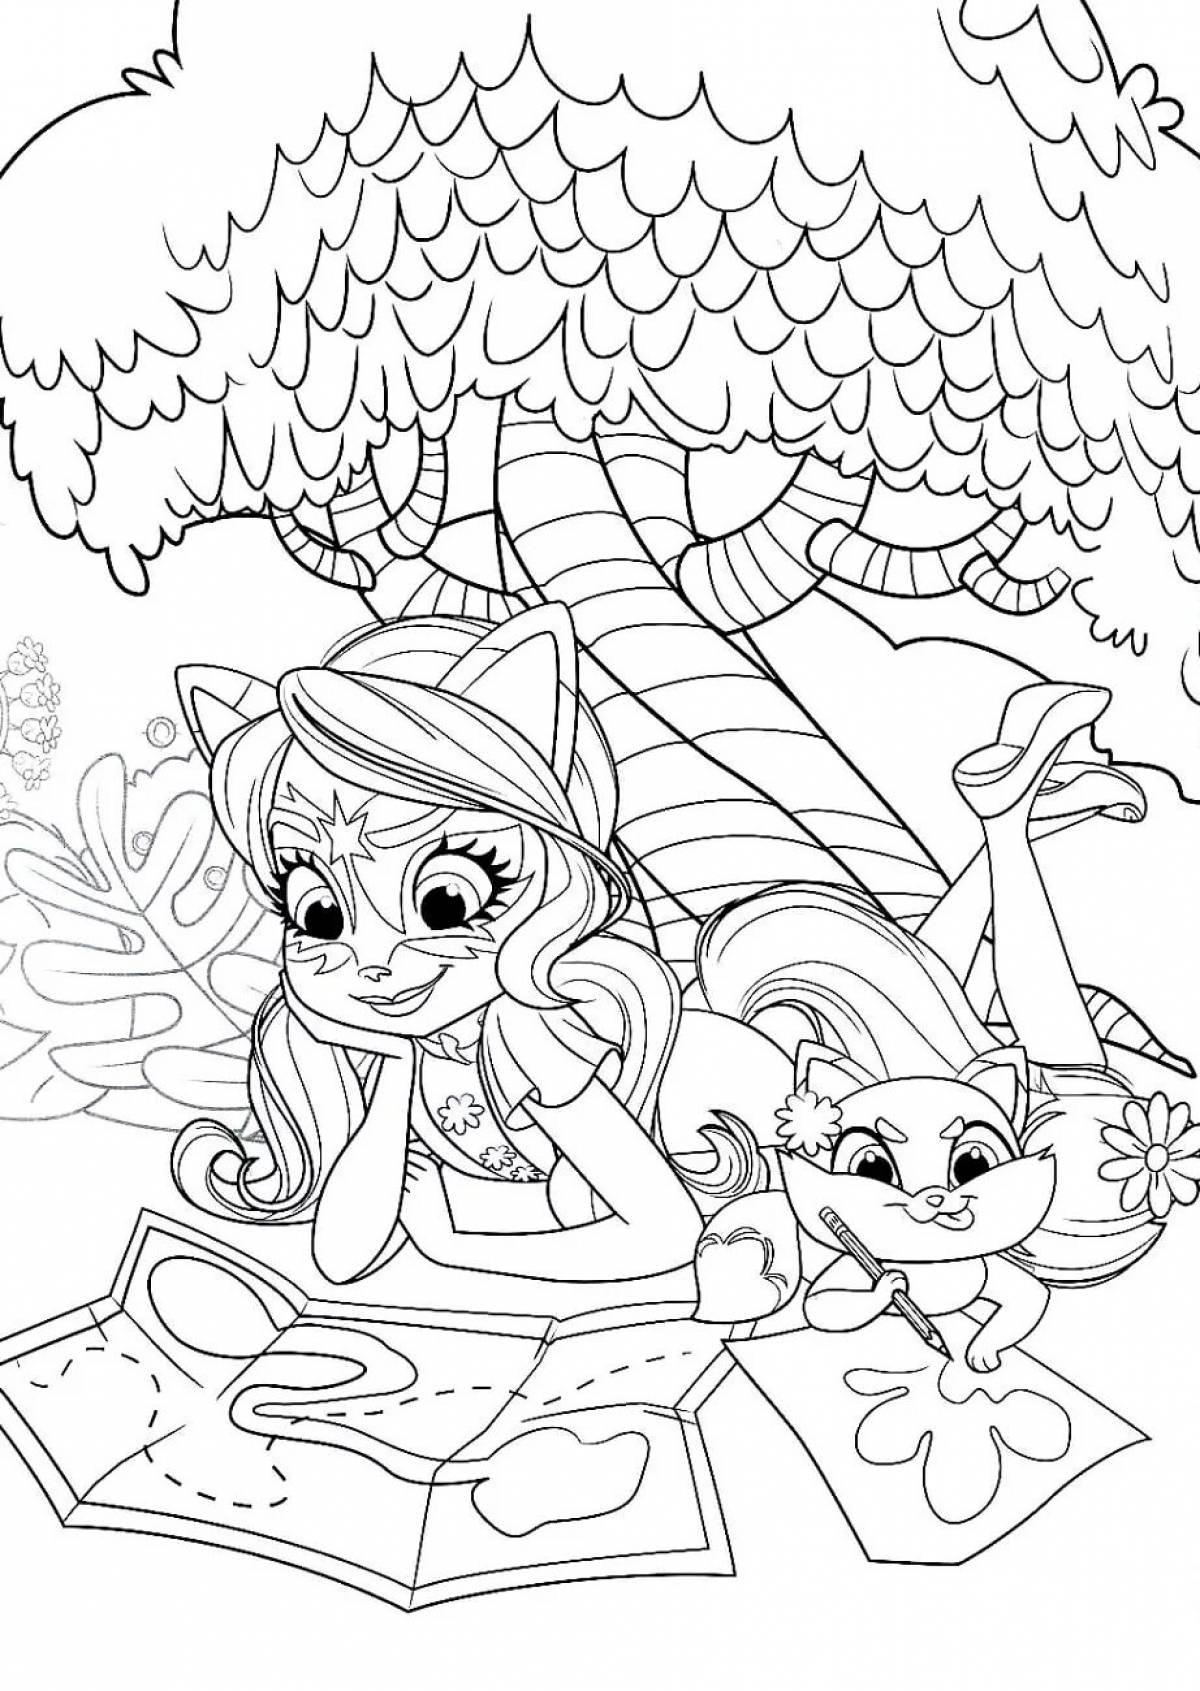 Entenchymal deluxe coloring pages